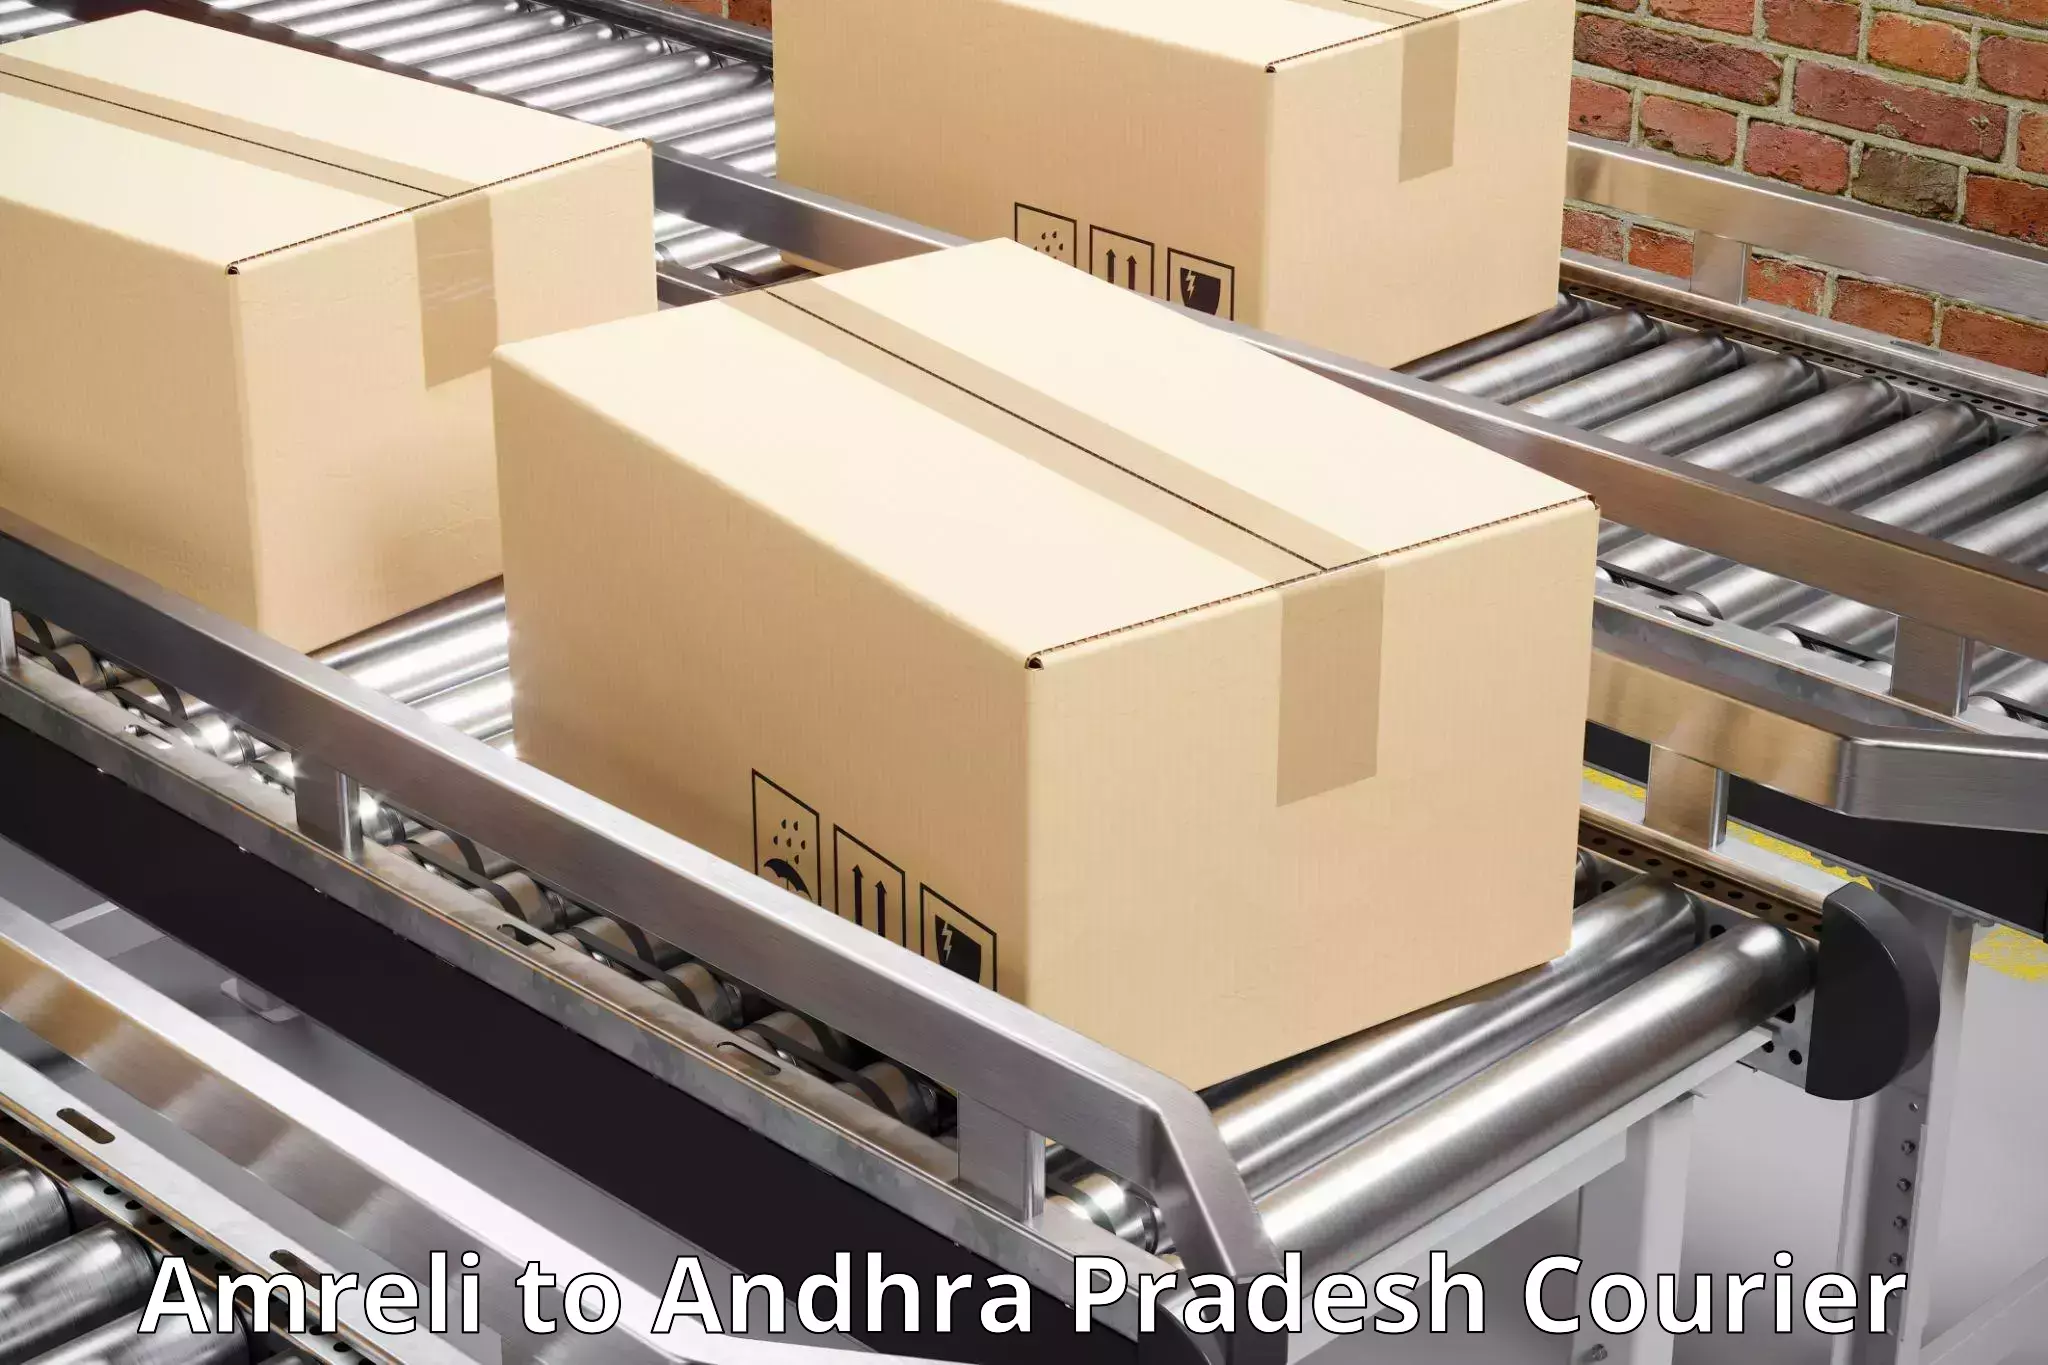 State-of-the-art courier technology Amreli to Podalakur